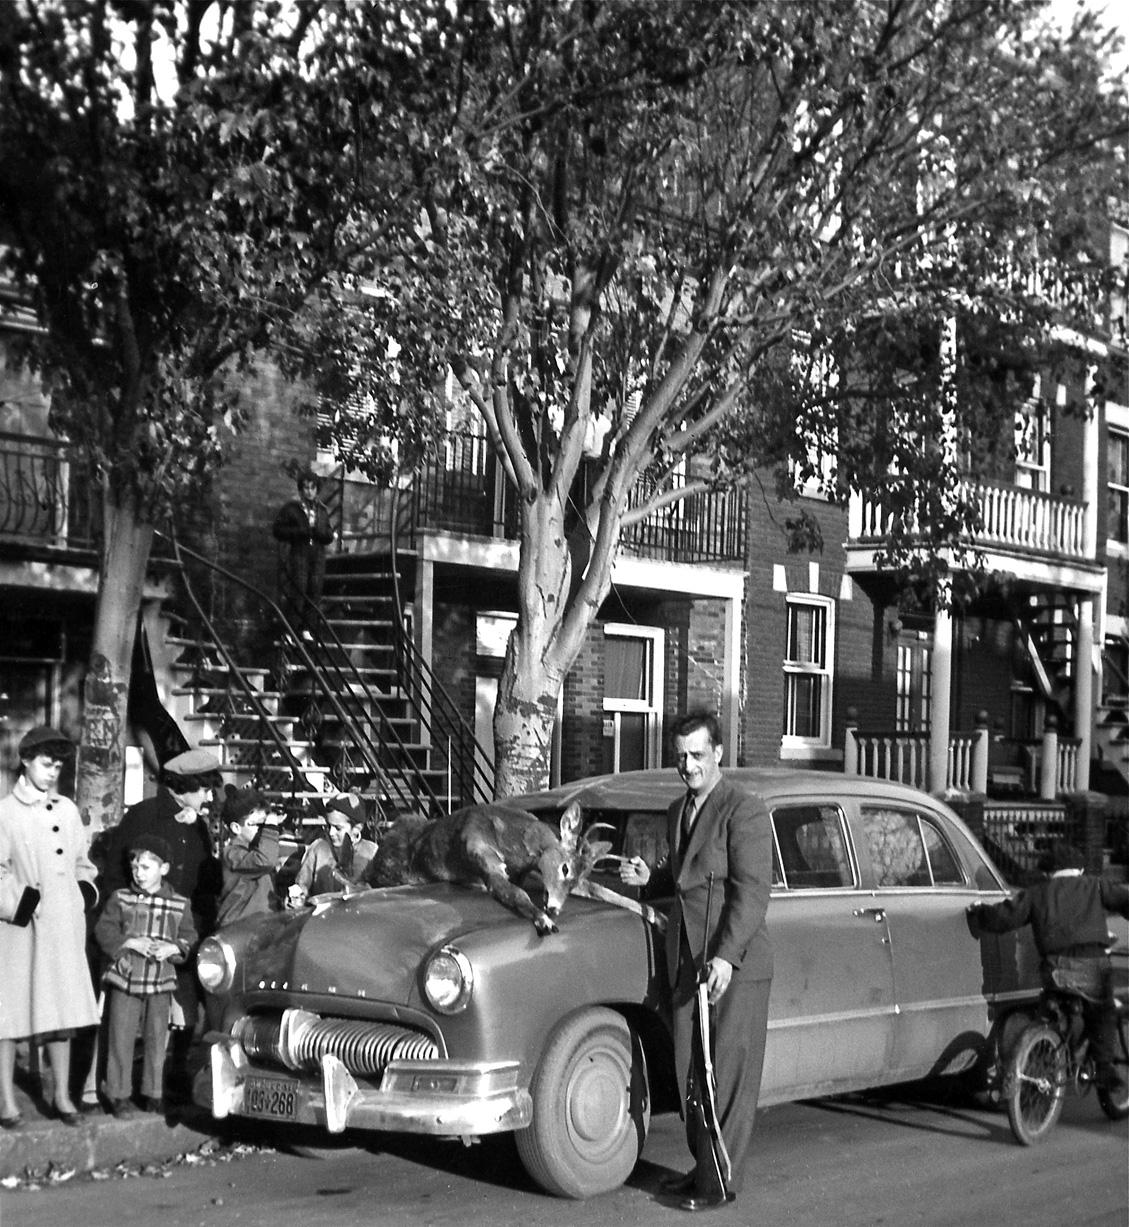 Typical Montreal scene in the 1950's except for the deer. Those houses with their staircases represent well that neighbourhood called "La Petite Patrie." Houses were built in the 1920's. The little fellow on the bicycle is my uncle.  I guess the Mercury Meteor is from 1950. View full size.

